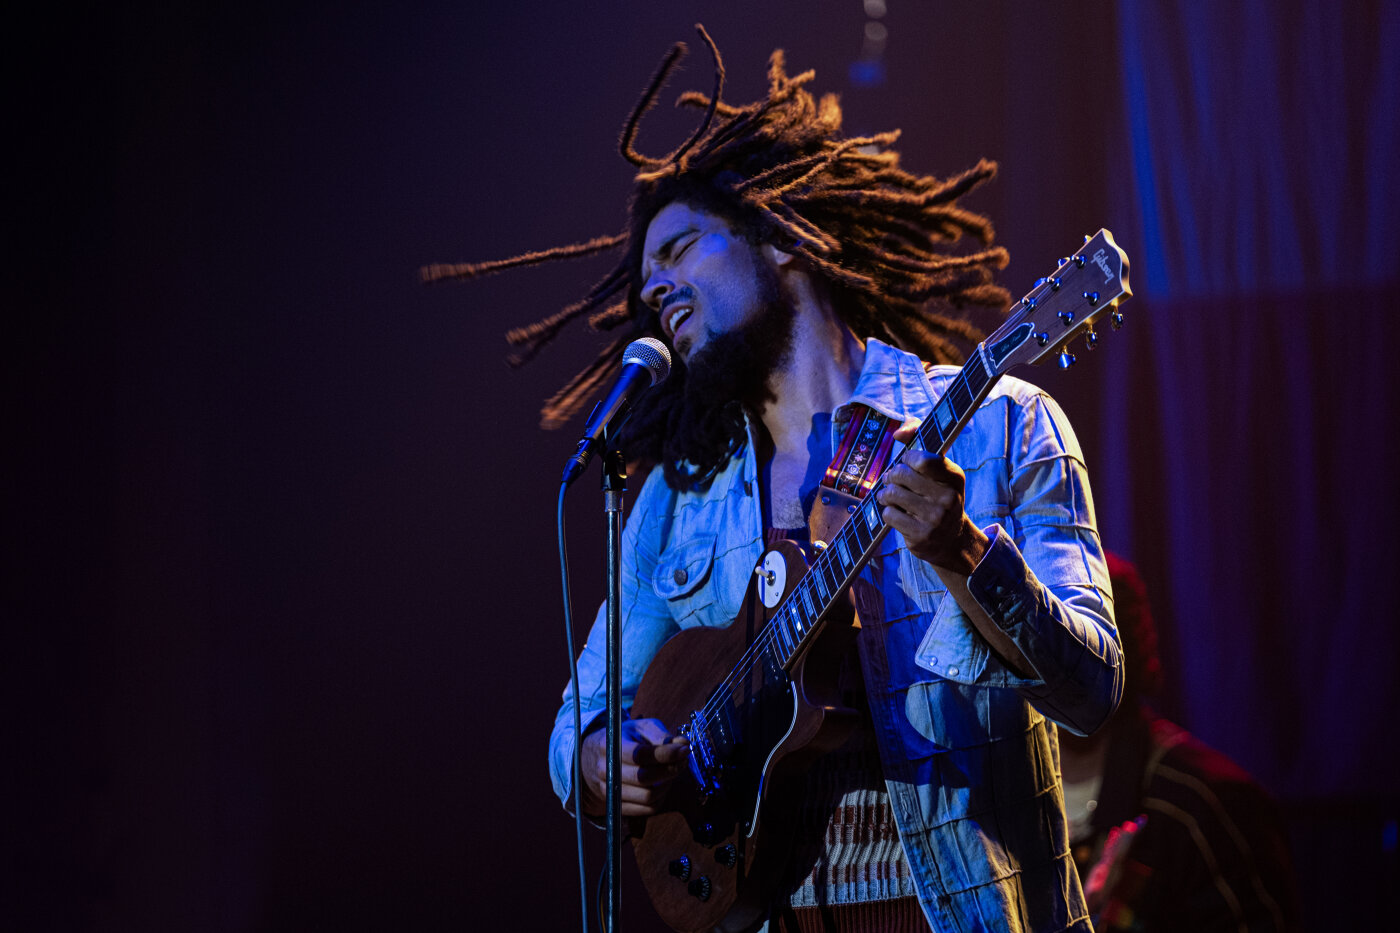 Movie Review: Bob Marley: One Love